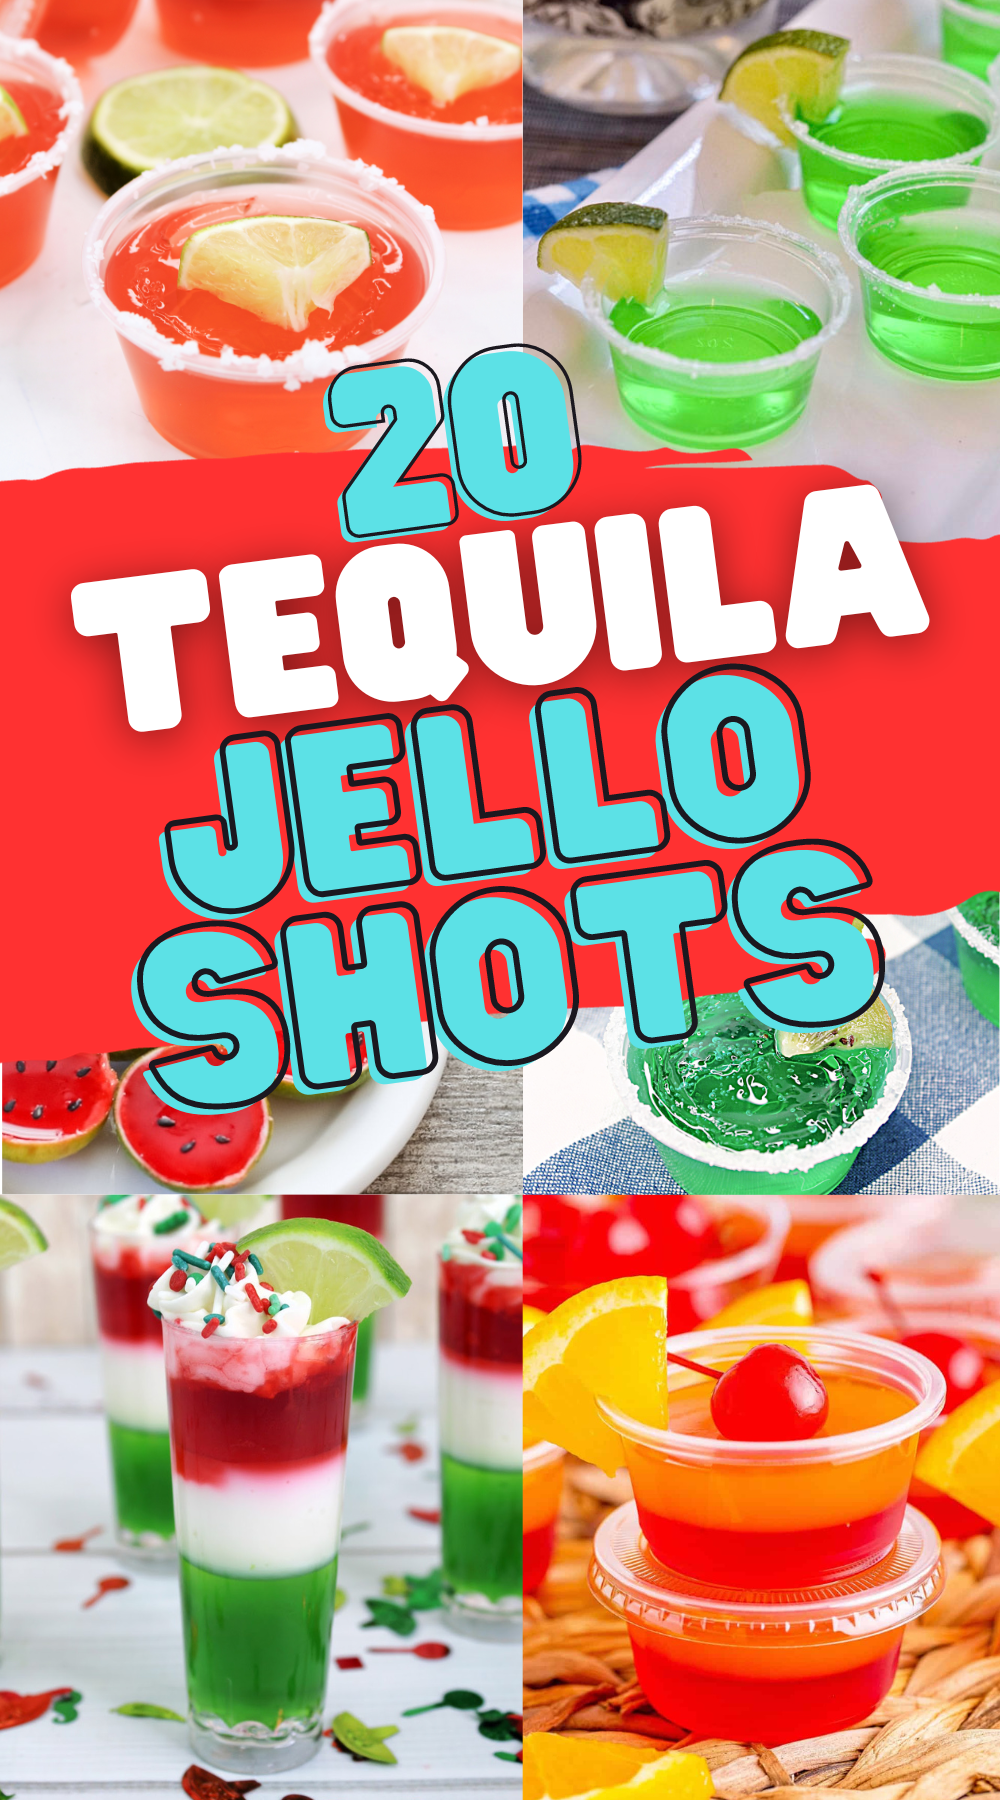 A collage of jello shots made with tequila. 20 great tequila jello shot recipes.